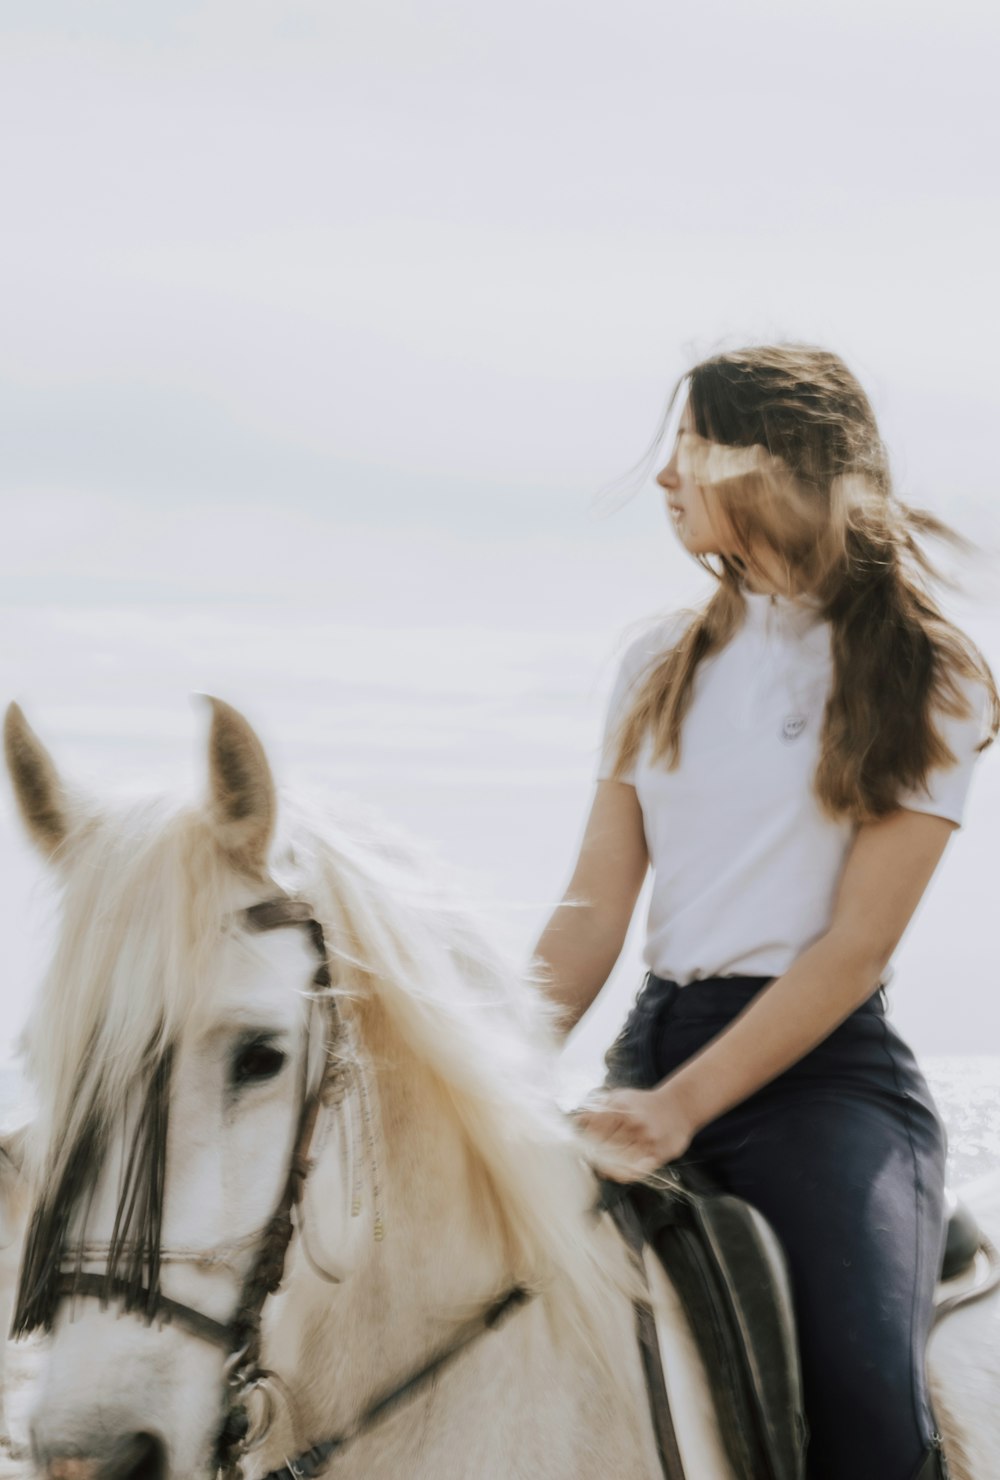 woman in white shirt and blue denim jeans sitting on white horse during daytime